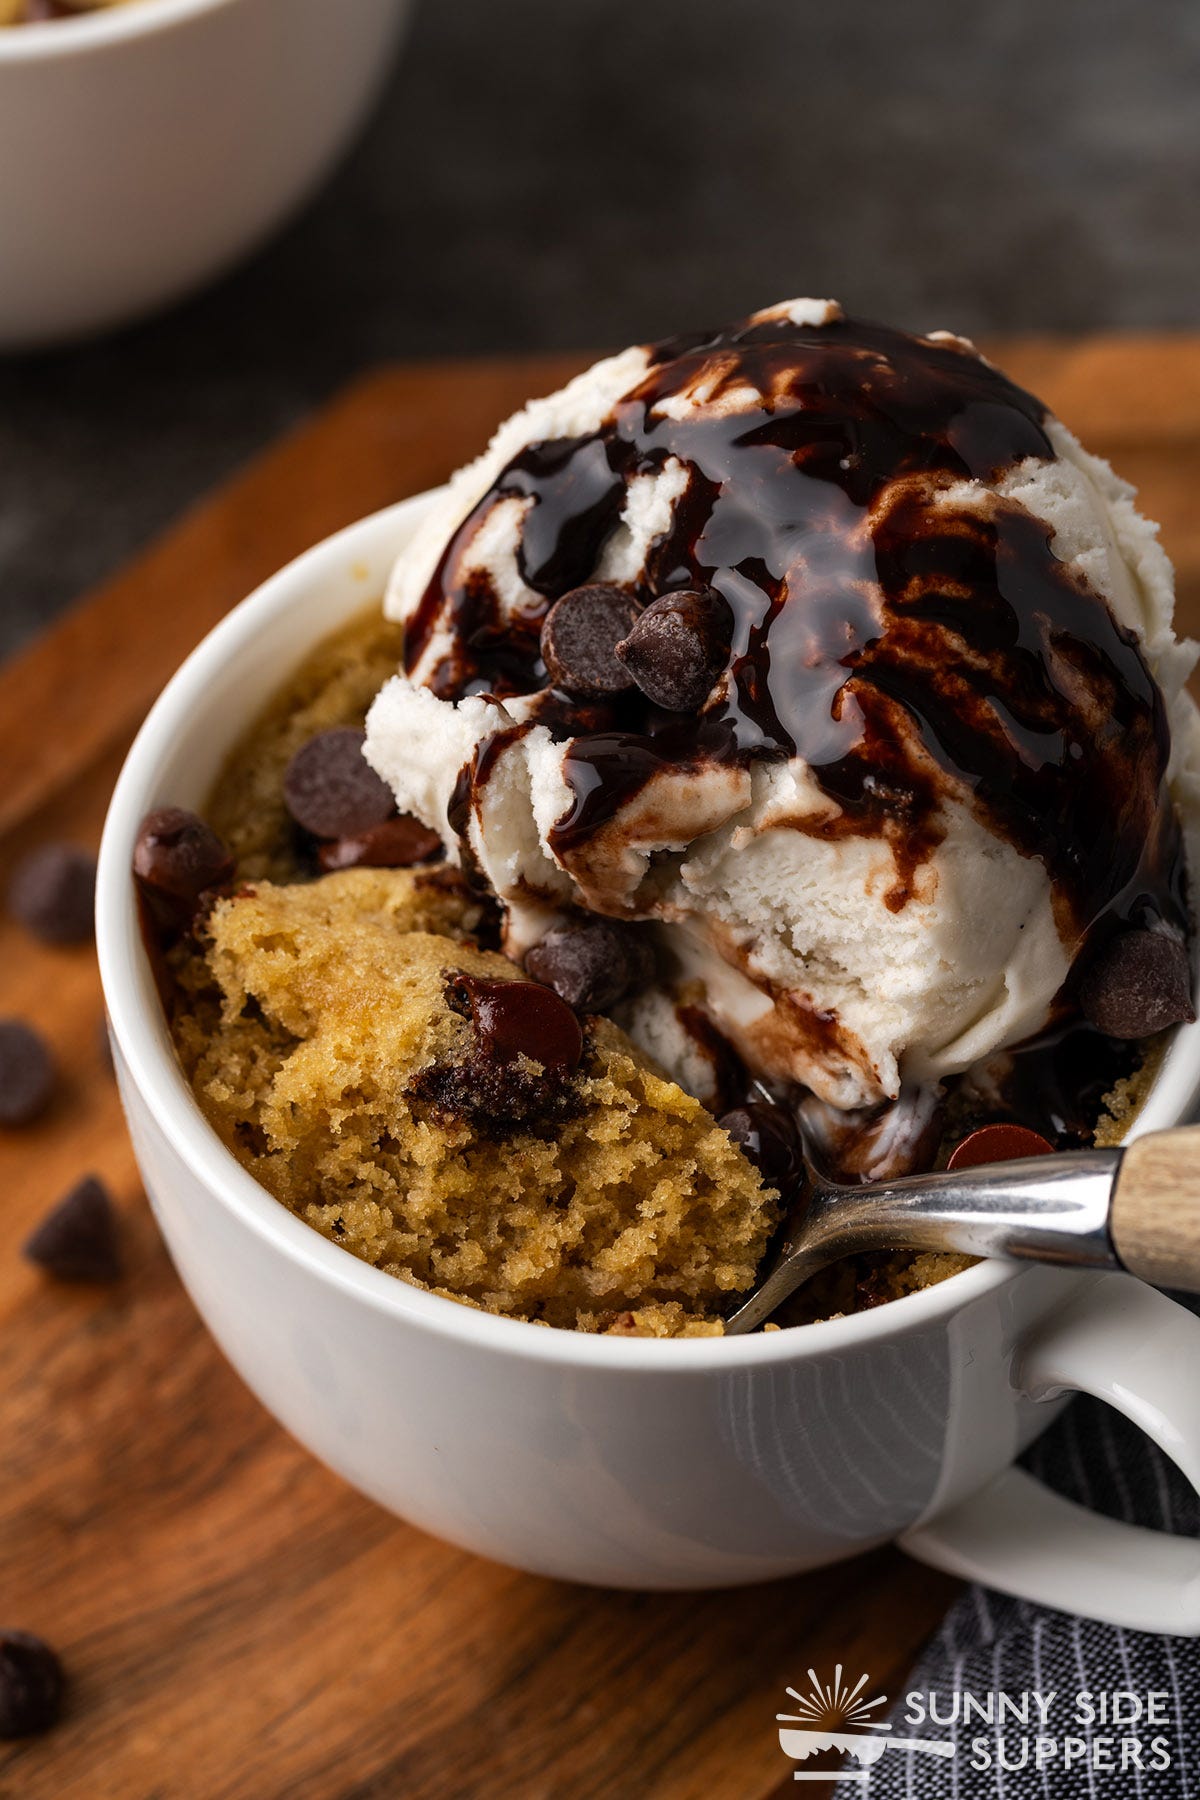 A chocolate chip cookie in a mug with ice cream and chocolate syrup.